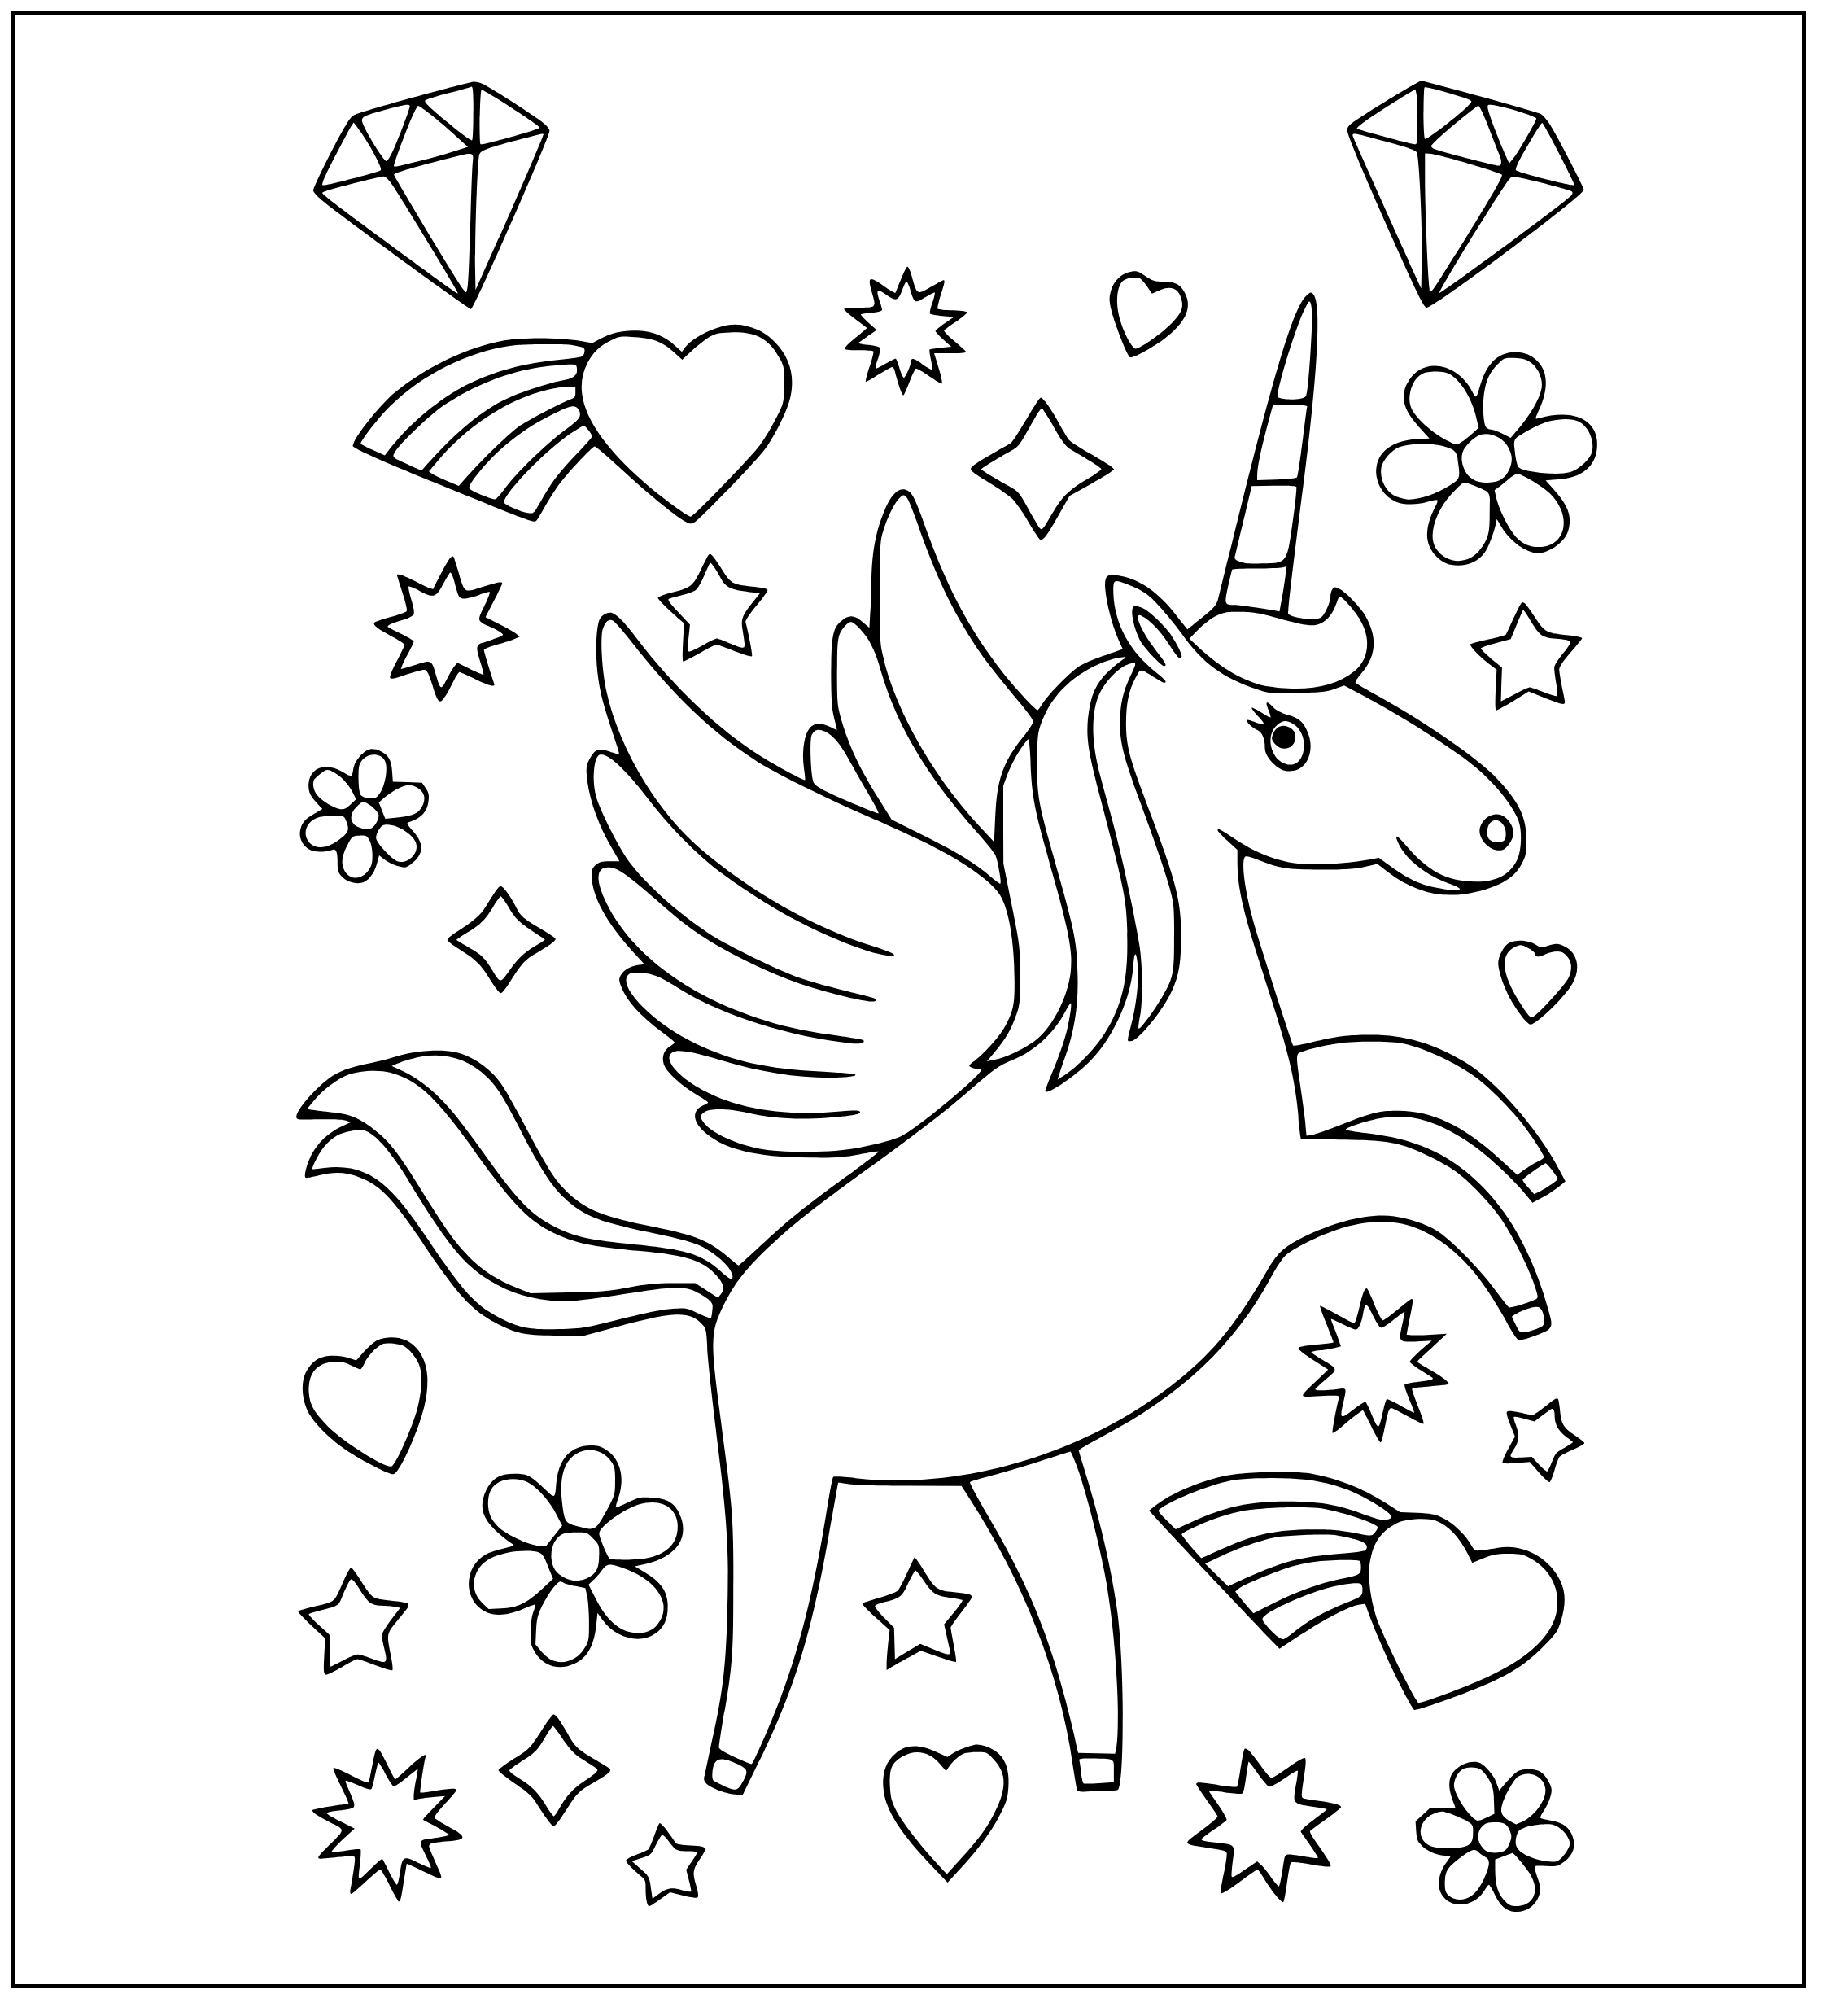 Printable Alicorn, Stars, Hearts and Flowers Coloring Page for kids.